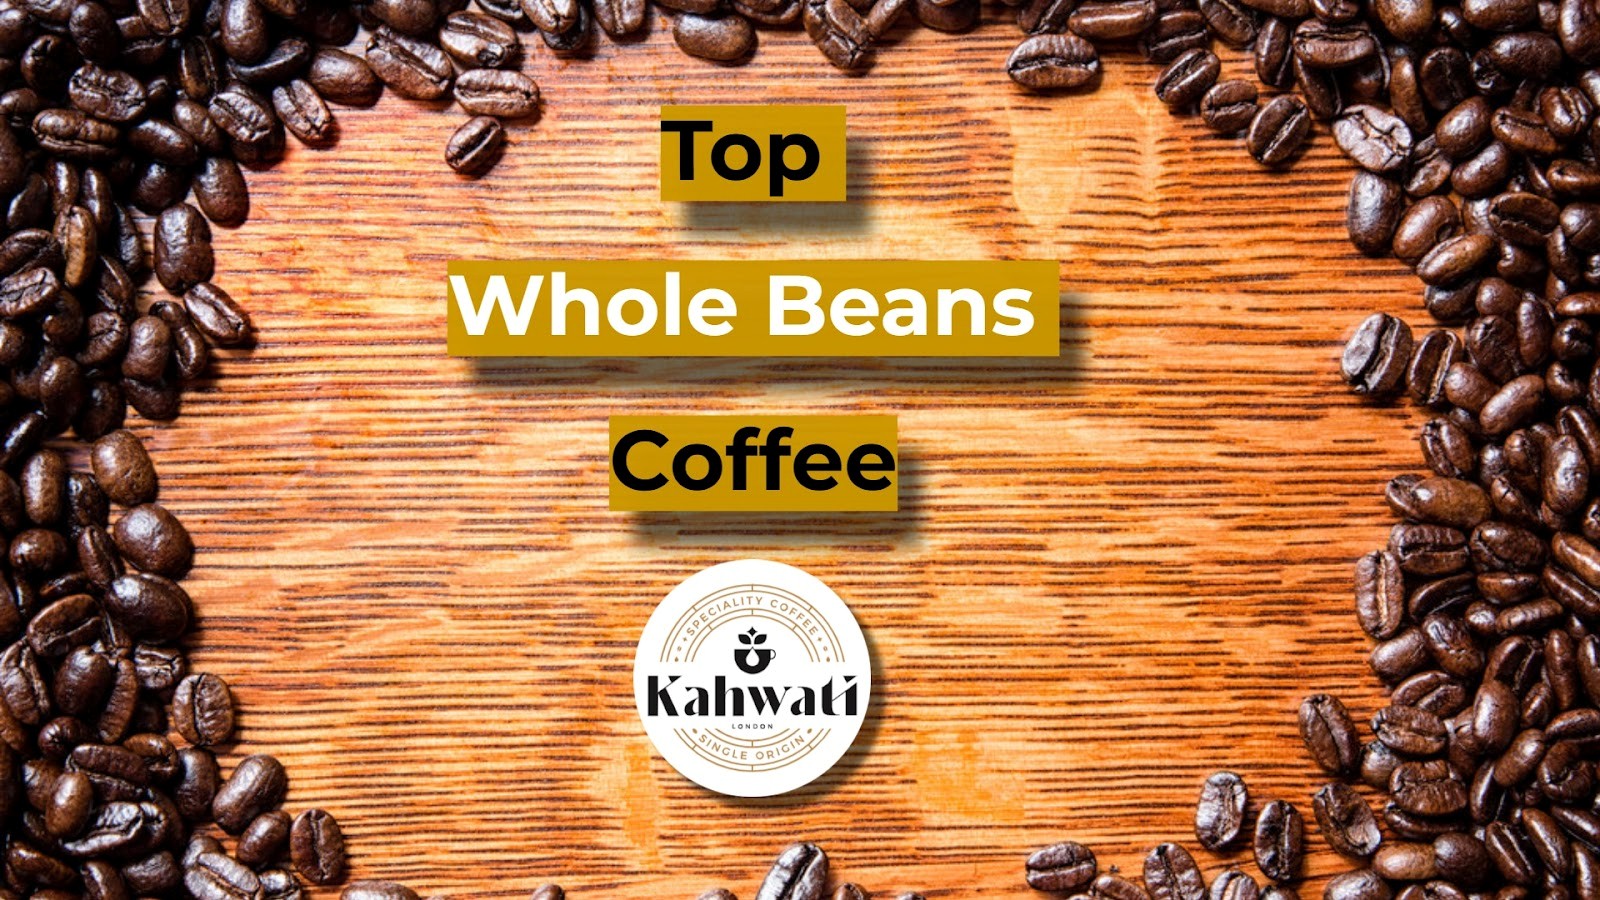 Top Whole Beans Coffee